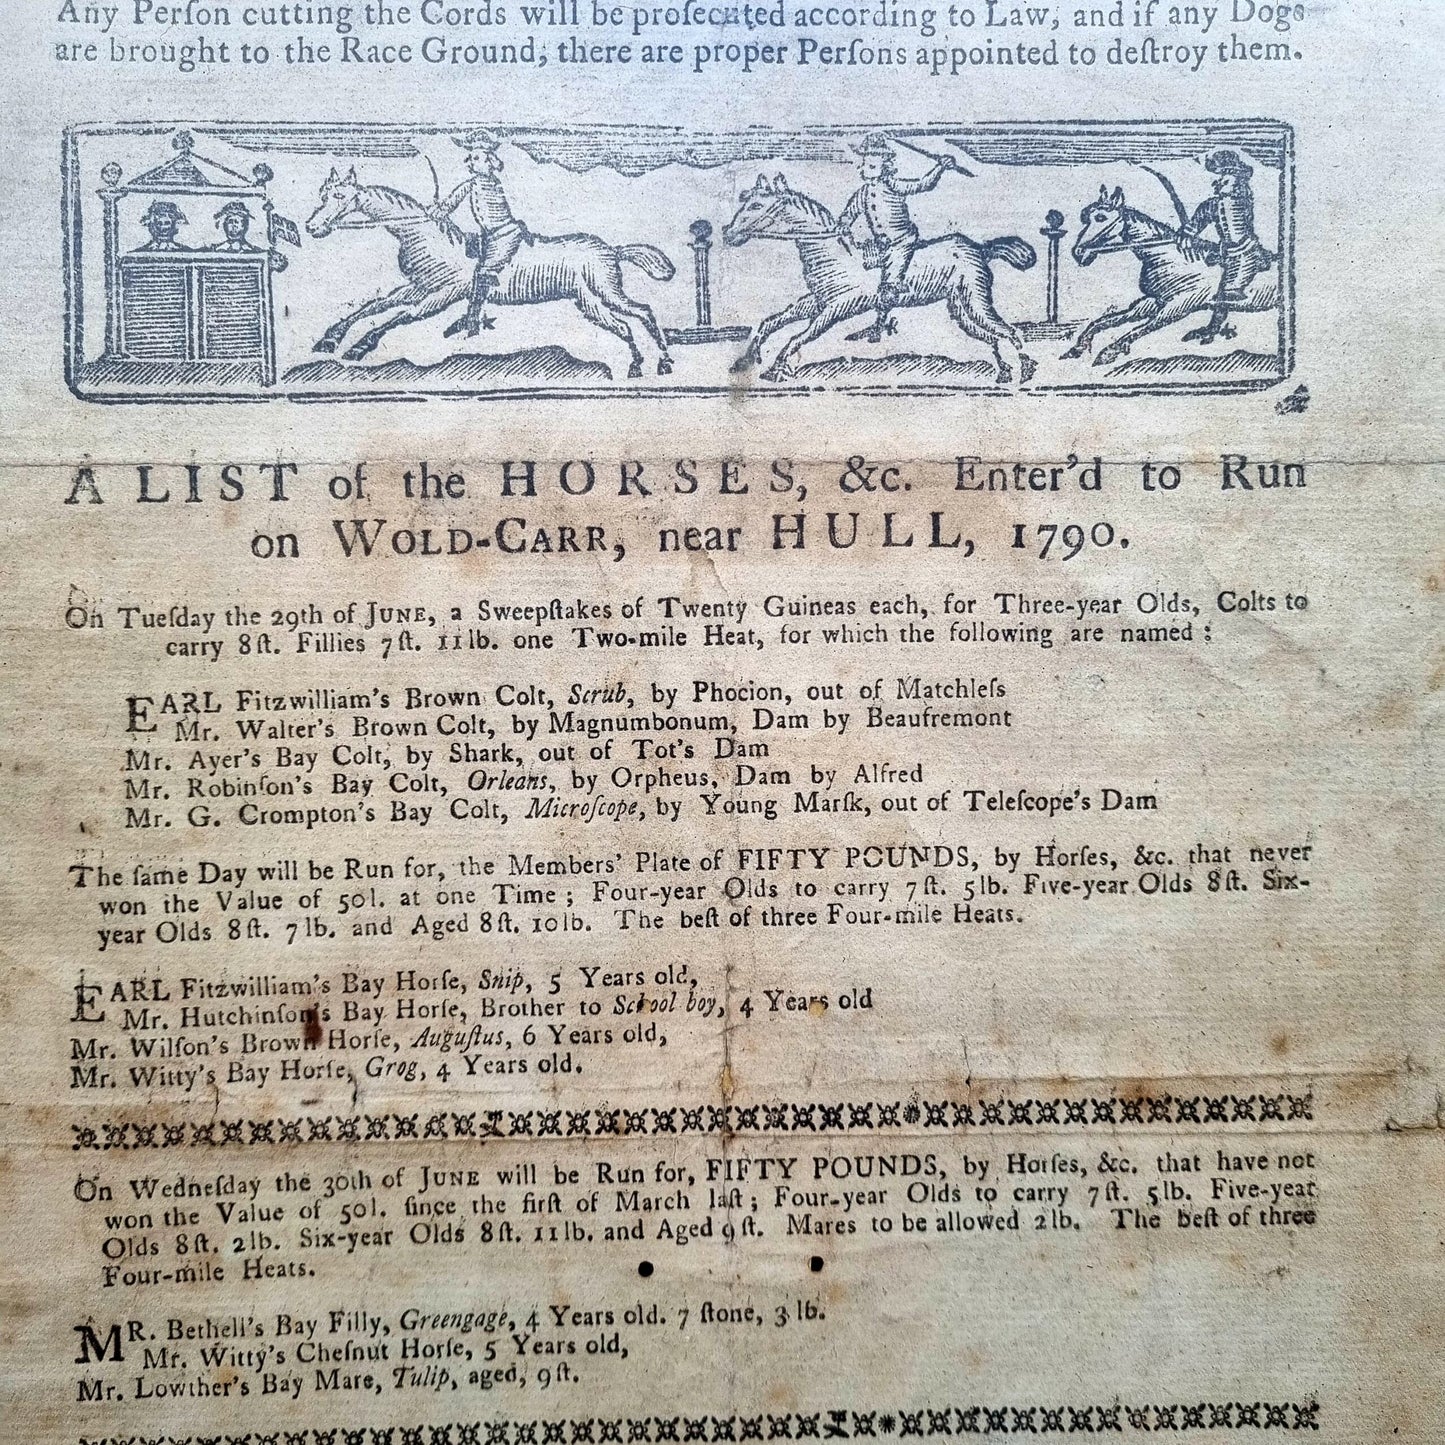 Late 18th Century English Antique Horse Racing Card or Pamphlet Dated 1790, Entitled "A List of the Horses, &c, Enter'd to Run on Wold-Carr, Near Hull, 1790"